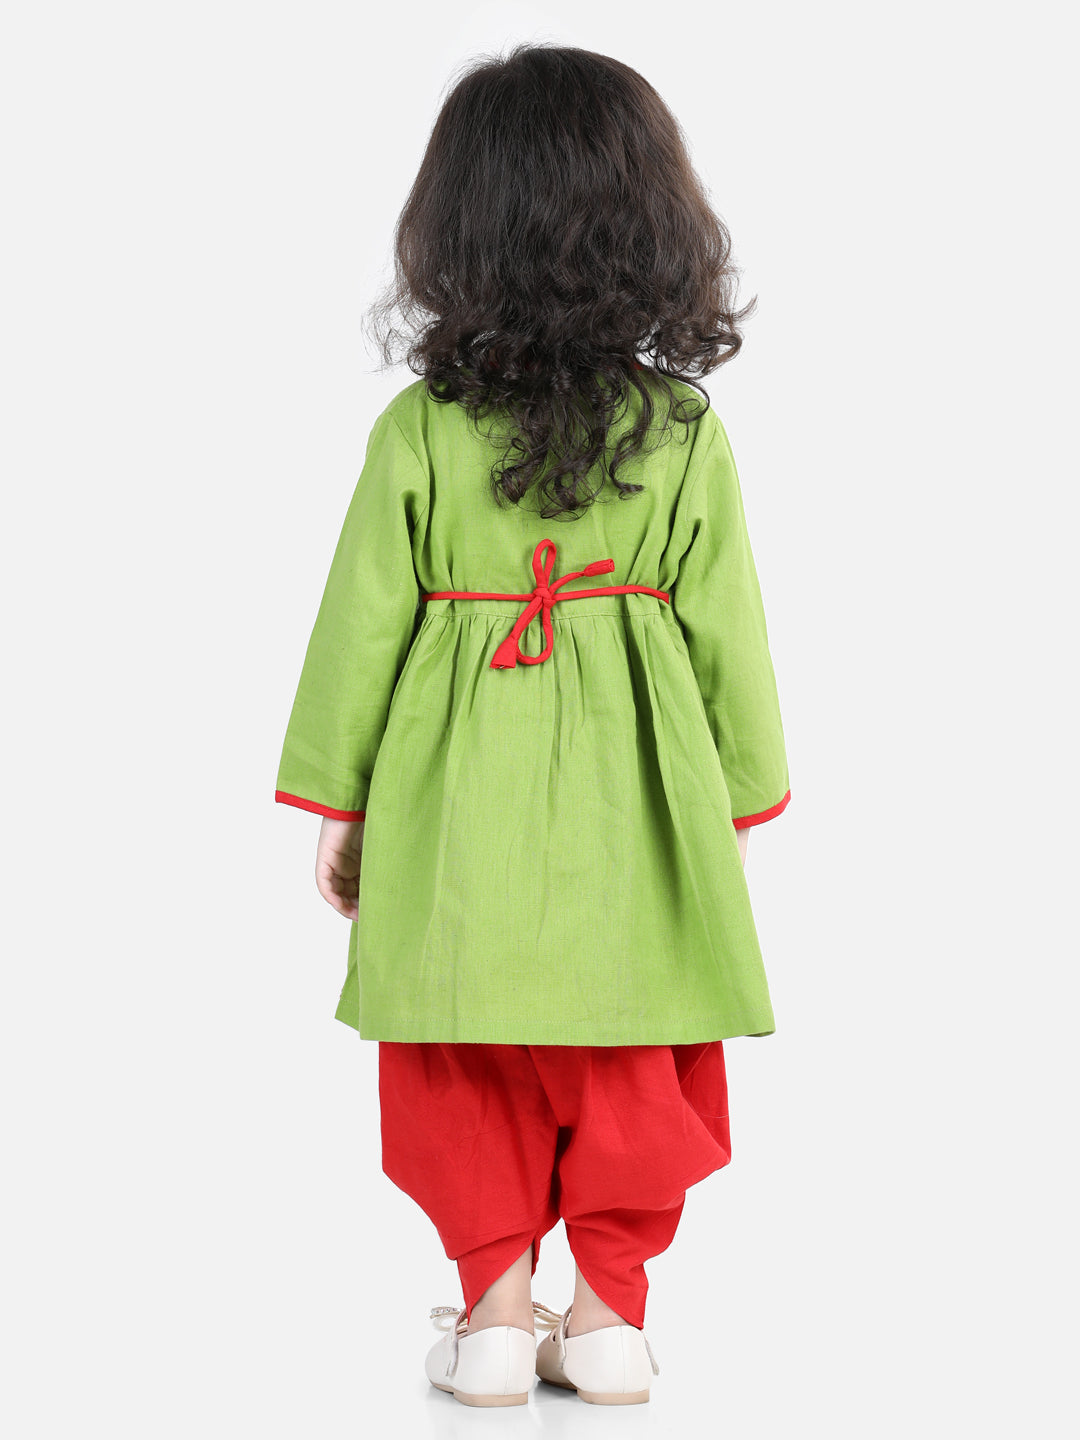 Bownbee Cotton Embroidered Top Dhoti For Girls - Green